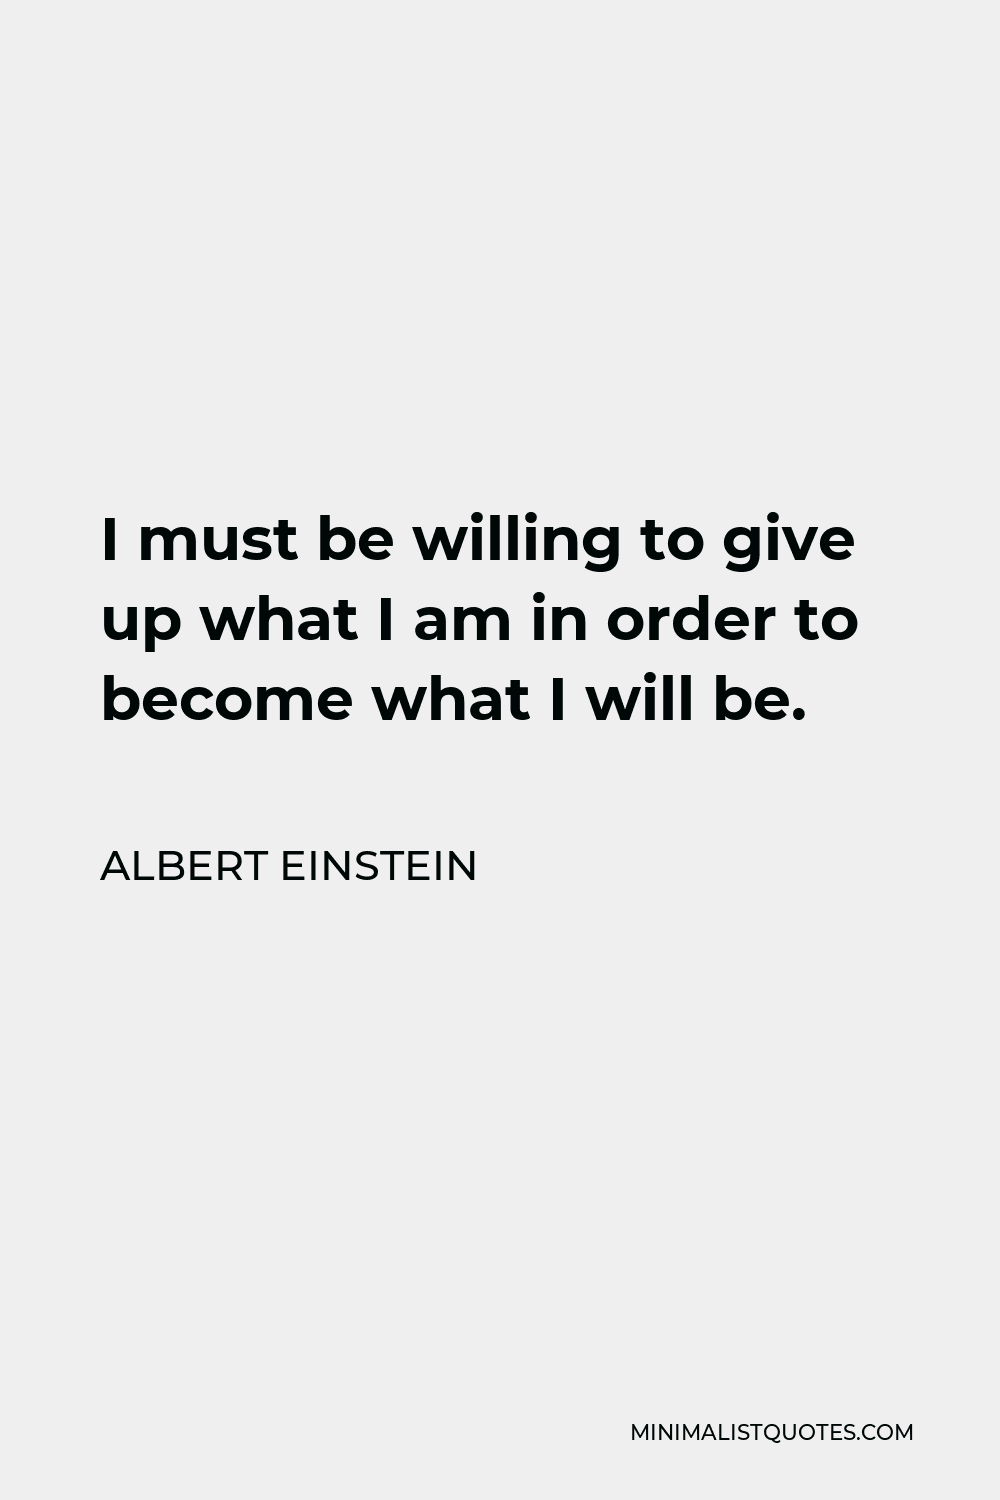 Albert Einstein Quote - I must be willing to give up what I am in order to become what I will be.